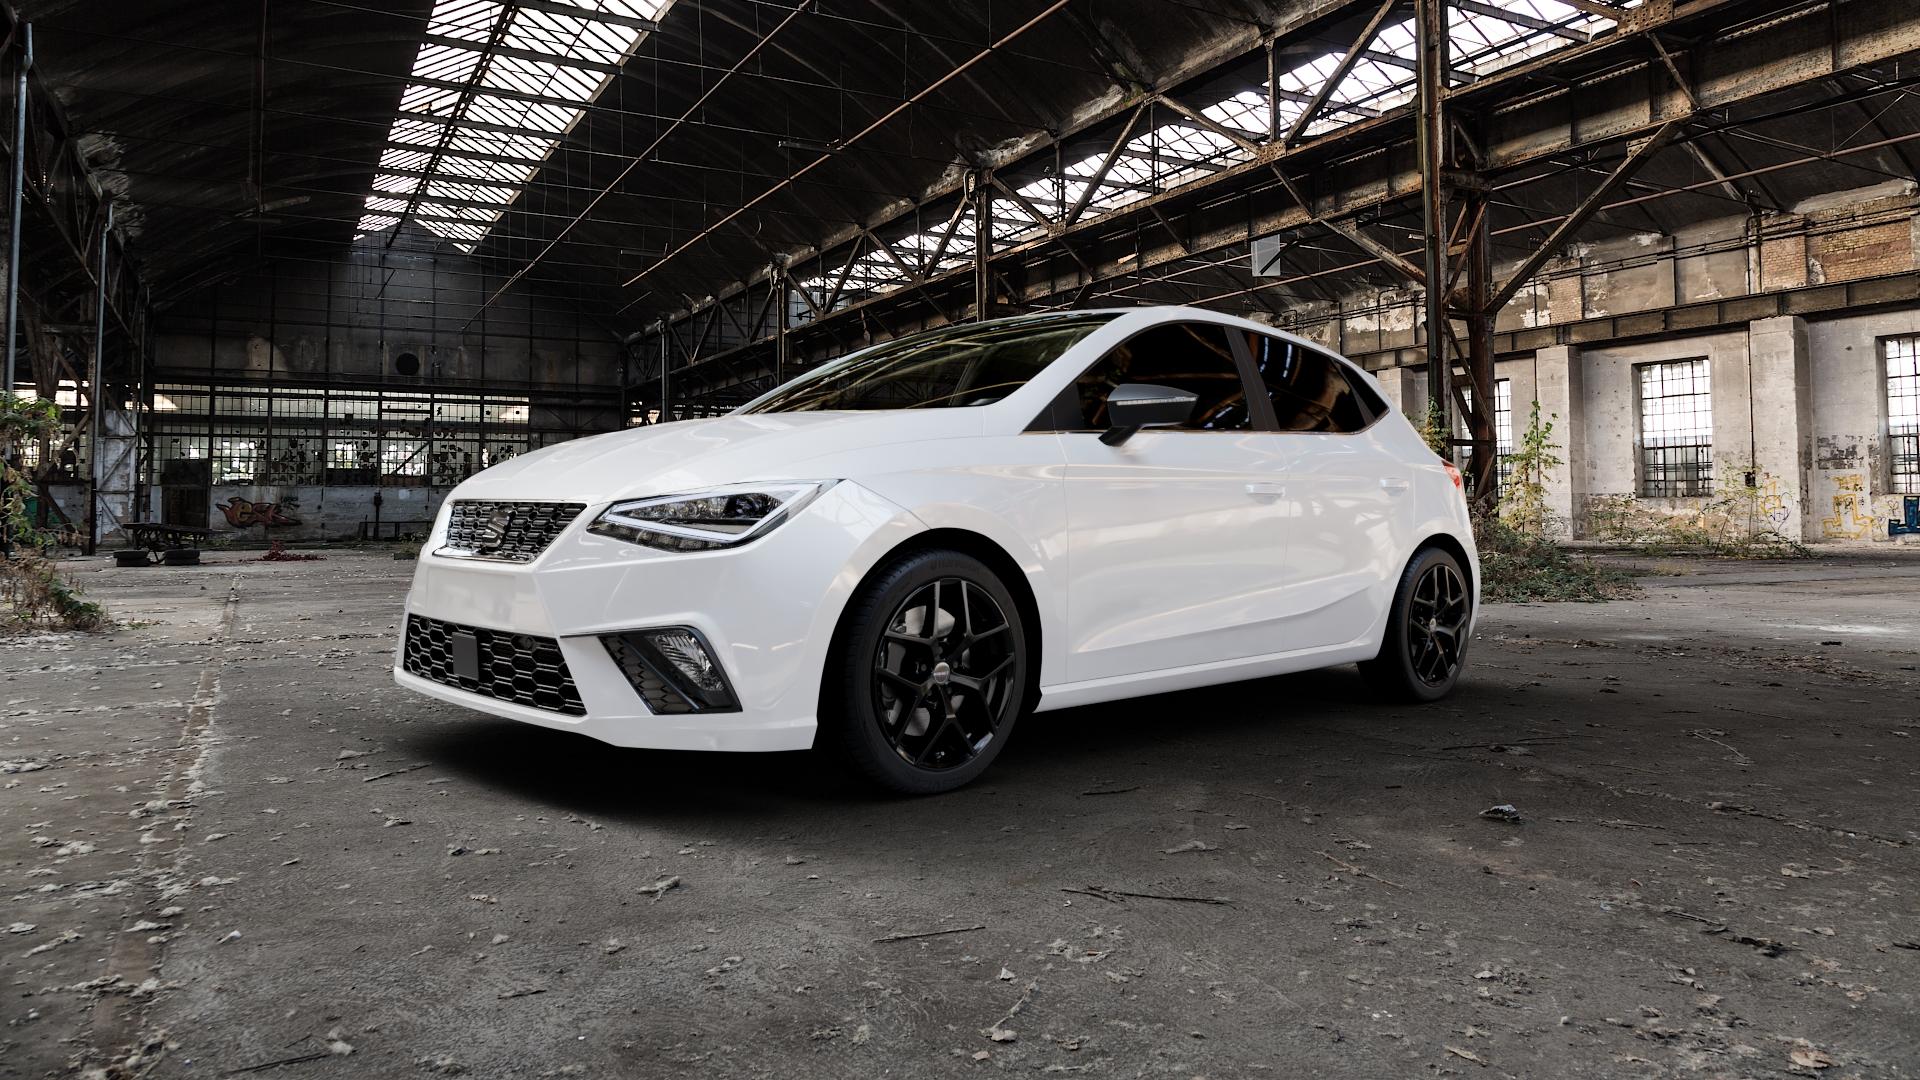 Seat Ibiza V Type KJ 1,0l TSI 59kW (80 hp) Wheels and Tyre Packages |  velonity.com